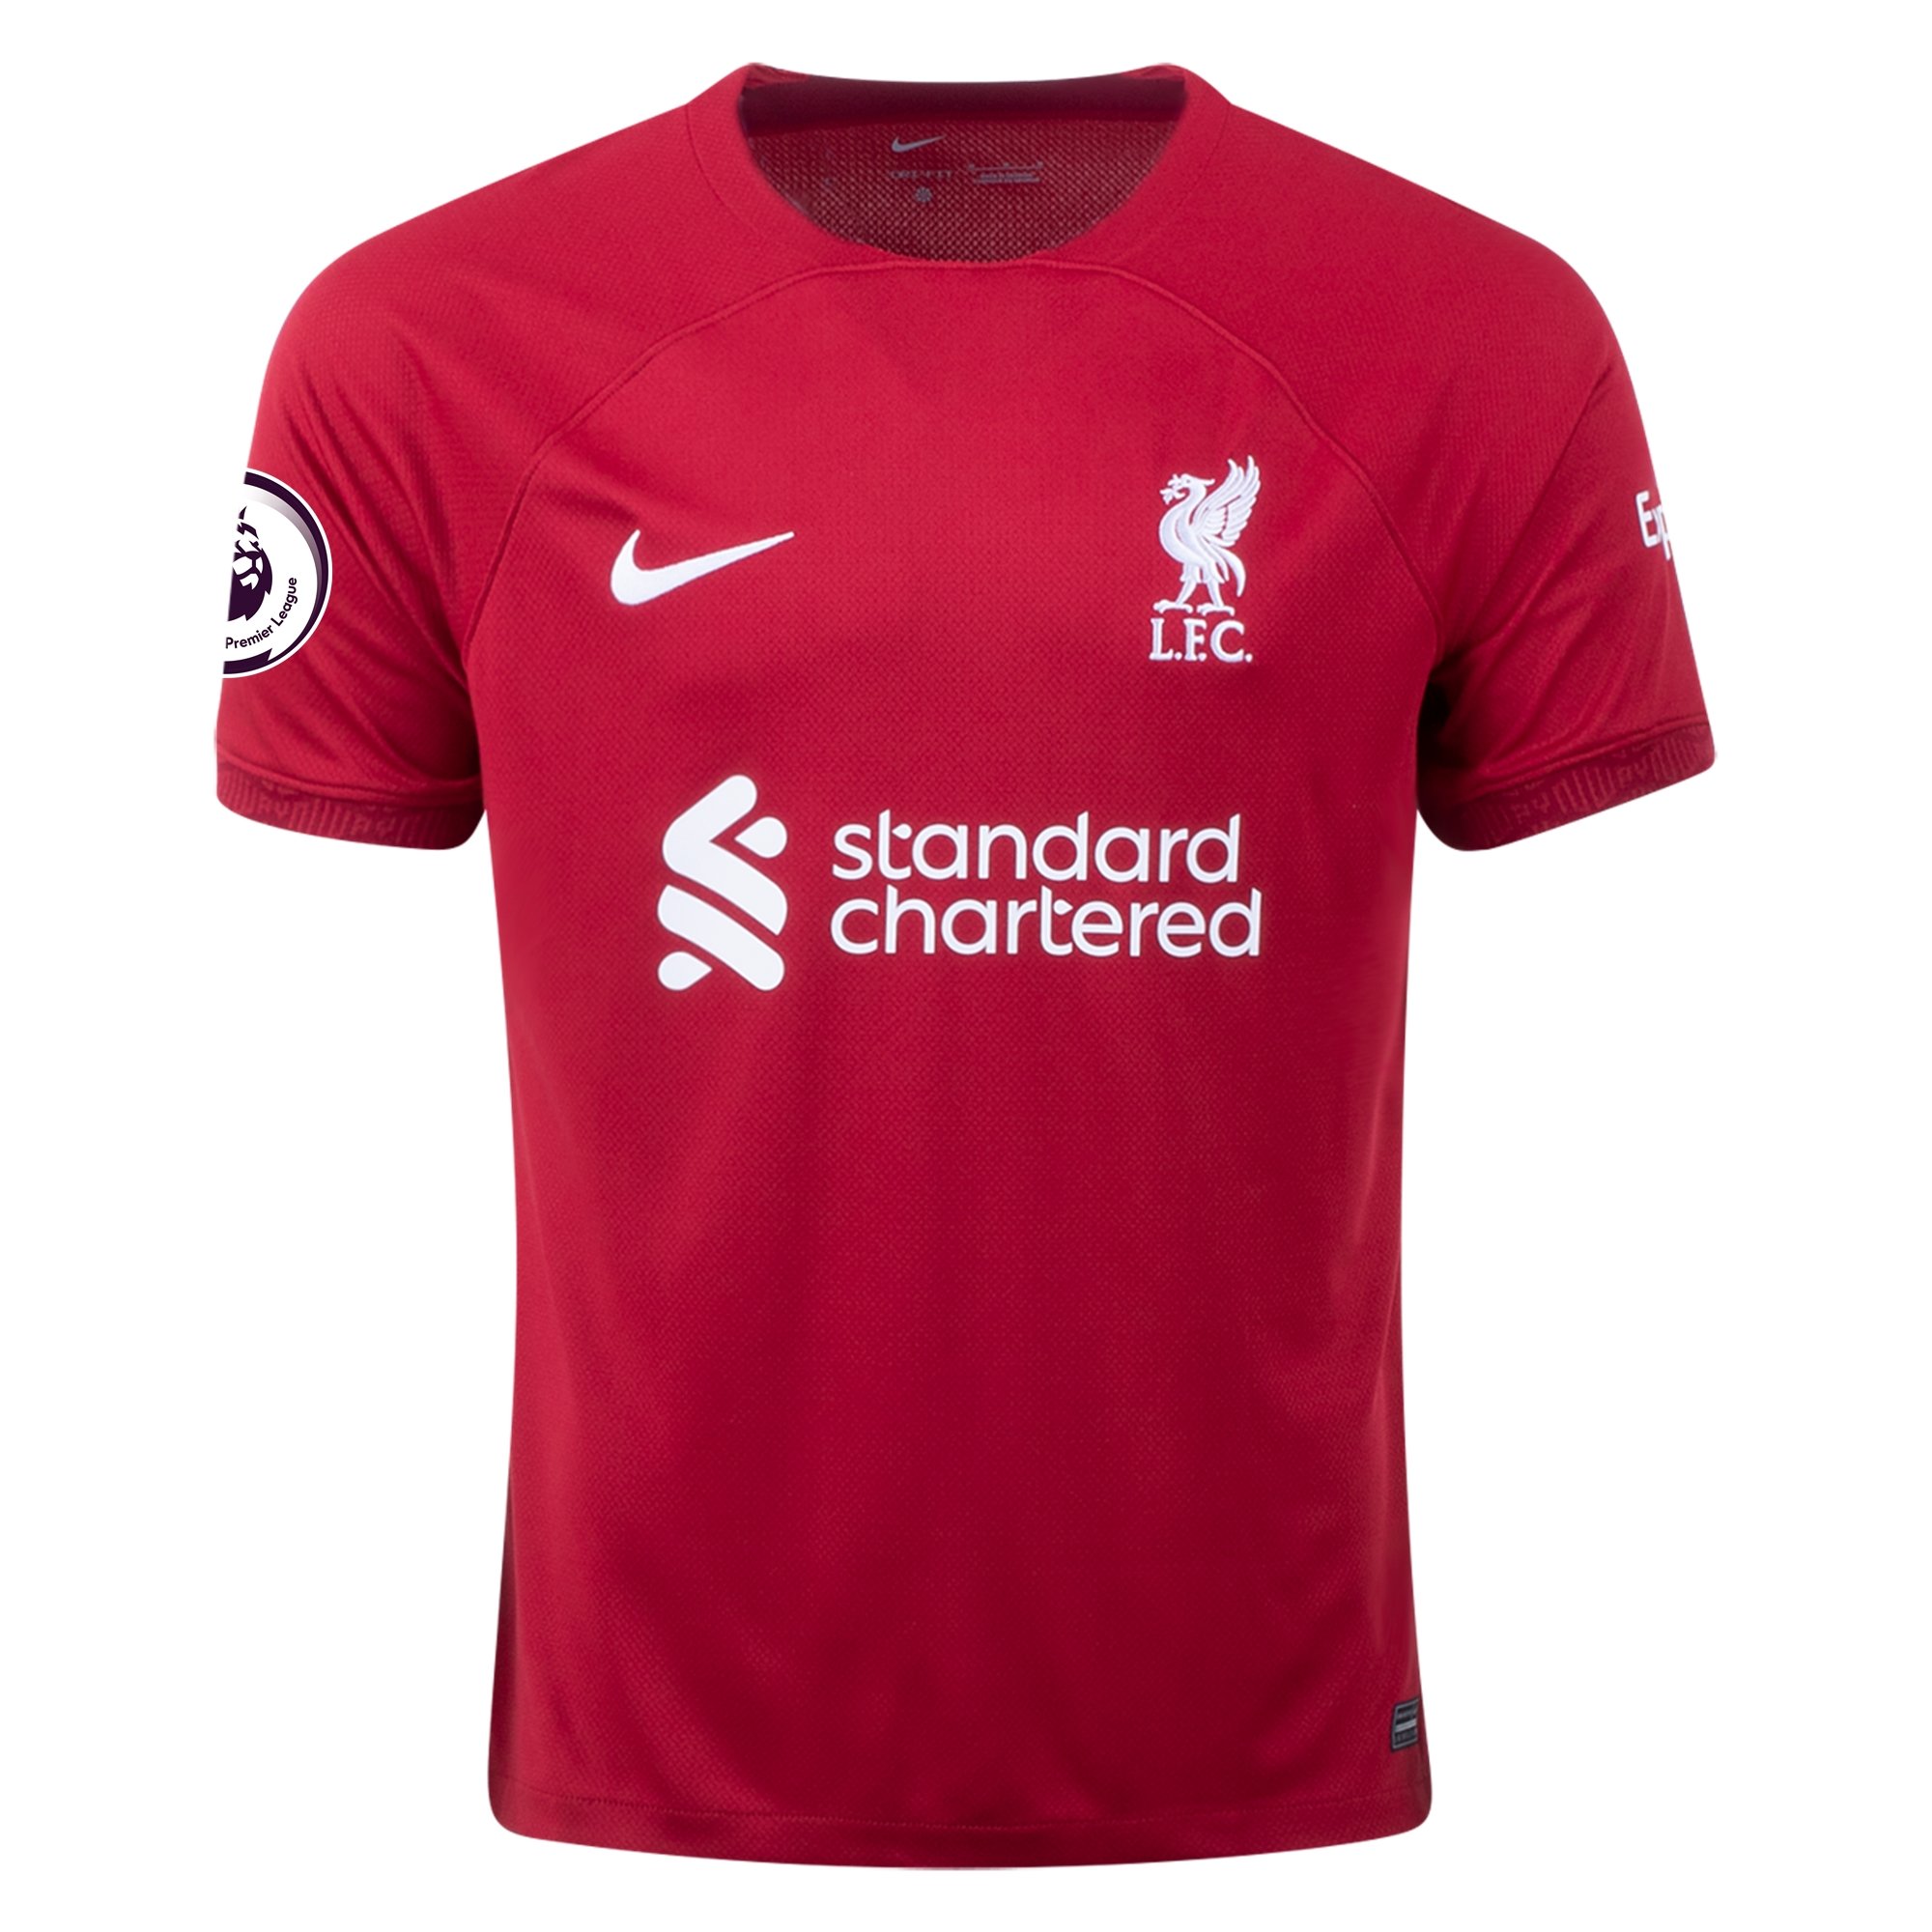 Mohamed Salah Liverpool 22/23 Home Jersey by Nike - Arena Jerseys